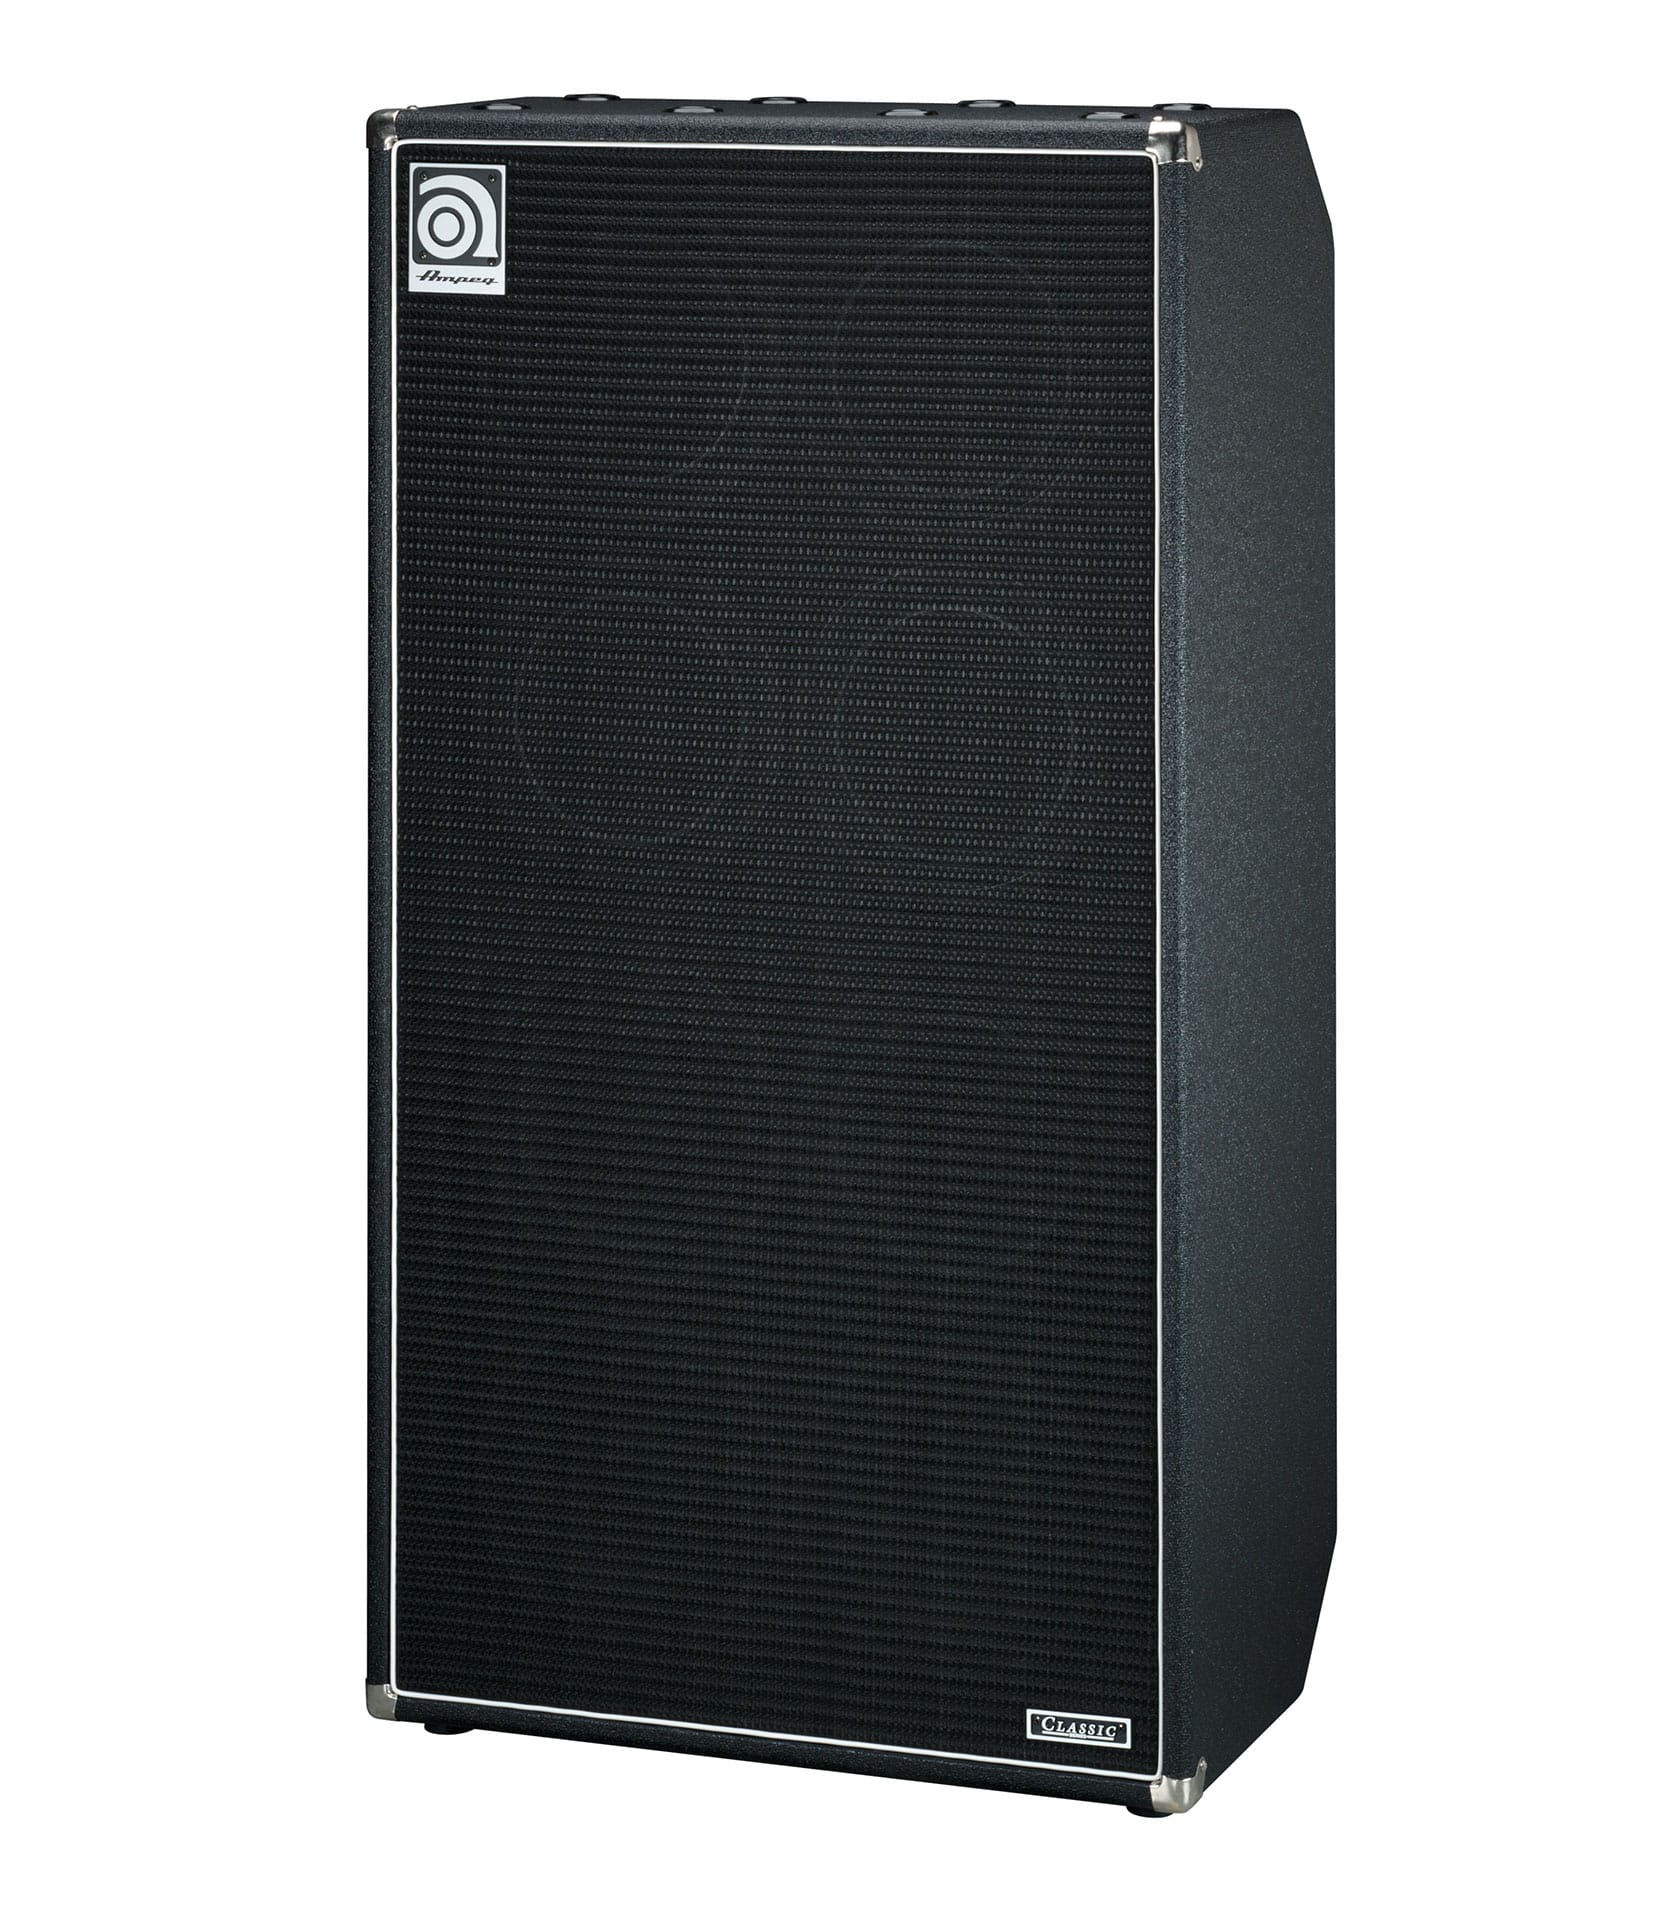 Ampeg - SVT-810E - Melody House Musical Instruments